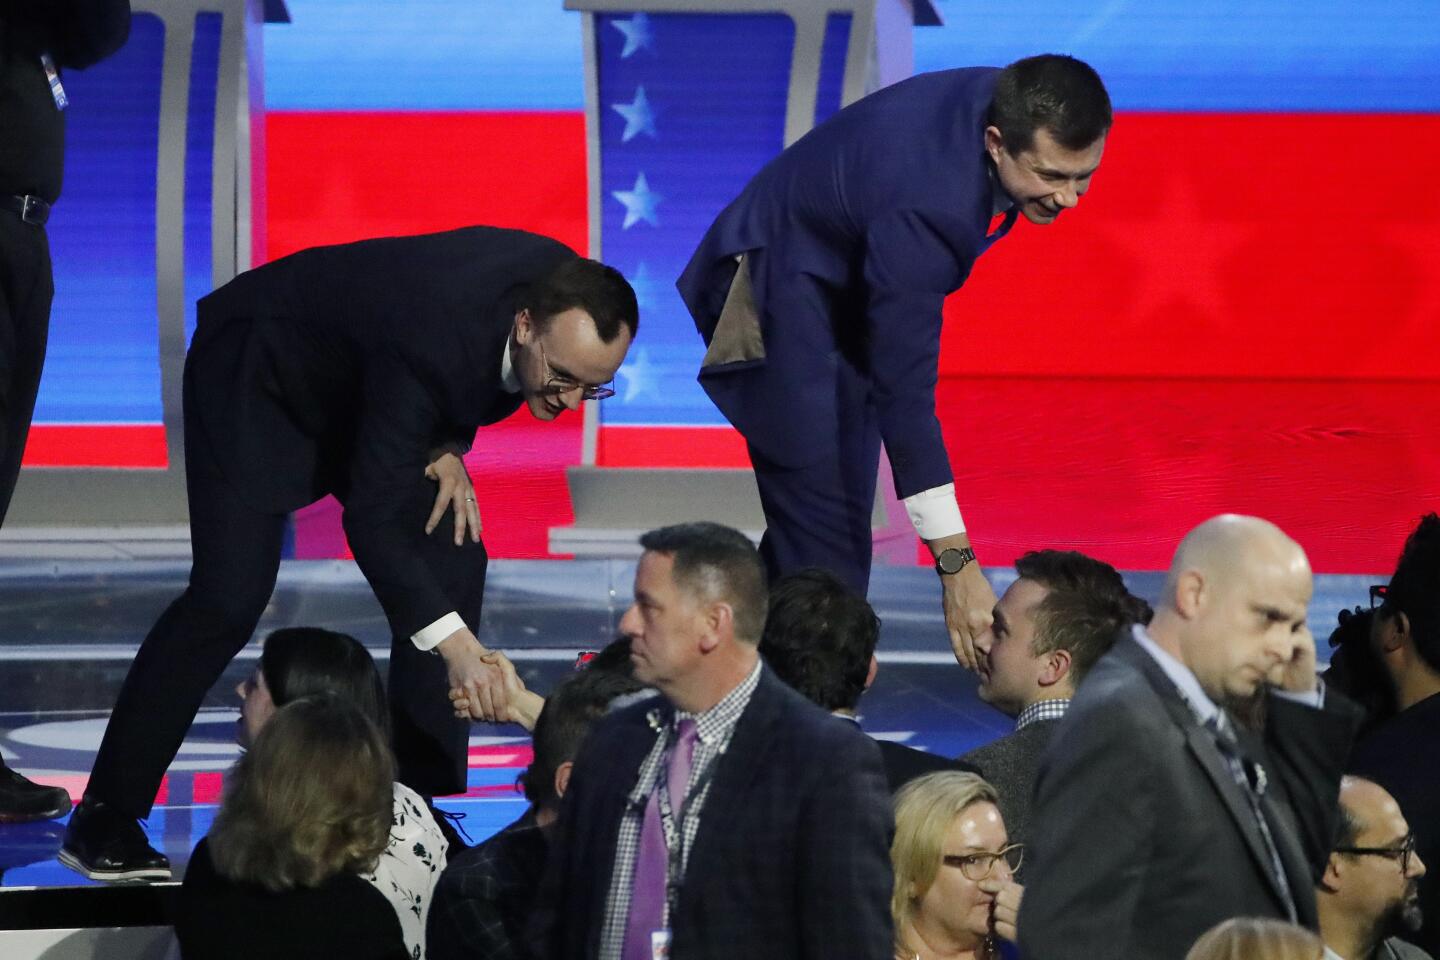 Former South Bend, Ind., Mayor Pete Buttigieg, right, and his husband, Chasten Buttigieg, shake hands with members of the audience after the Democratic presidential primary debate.